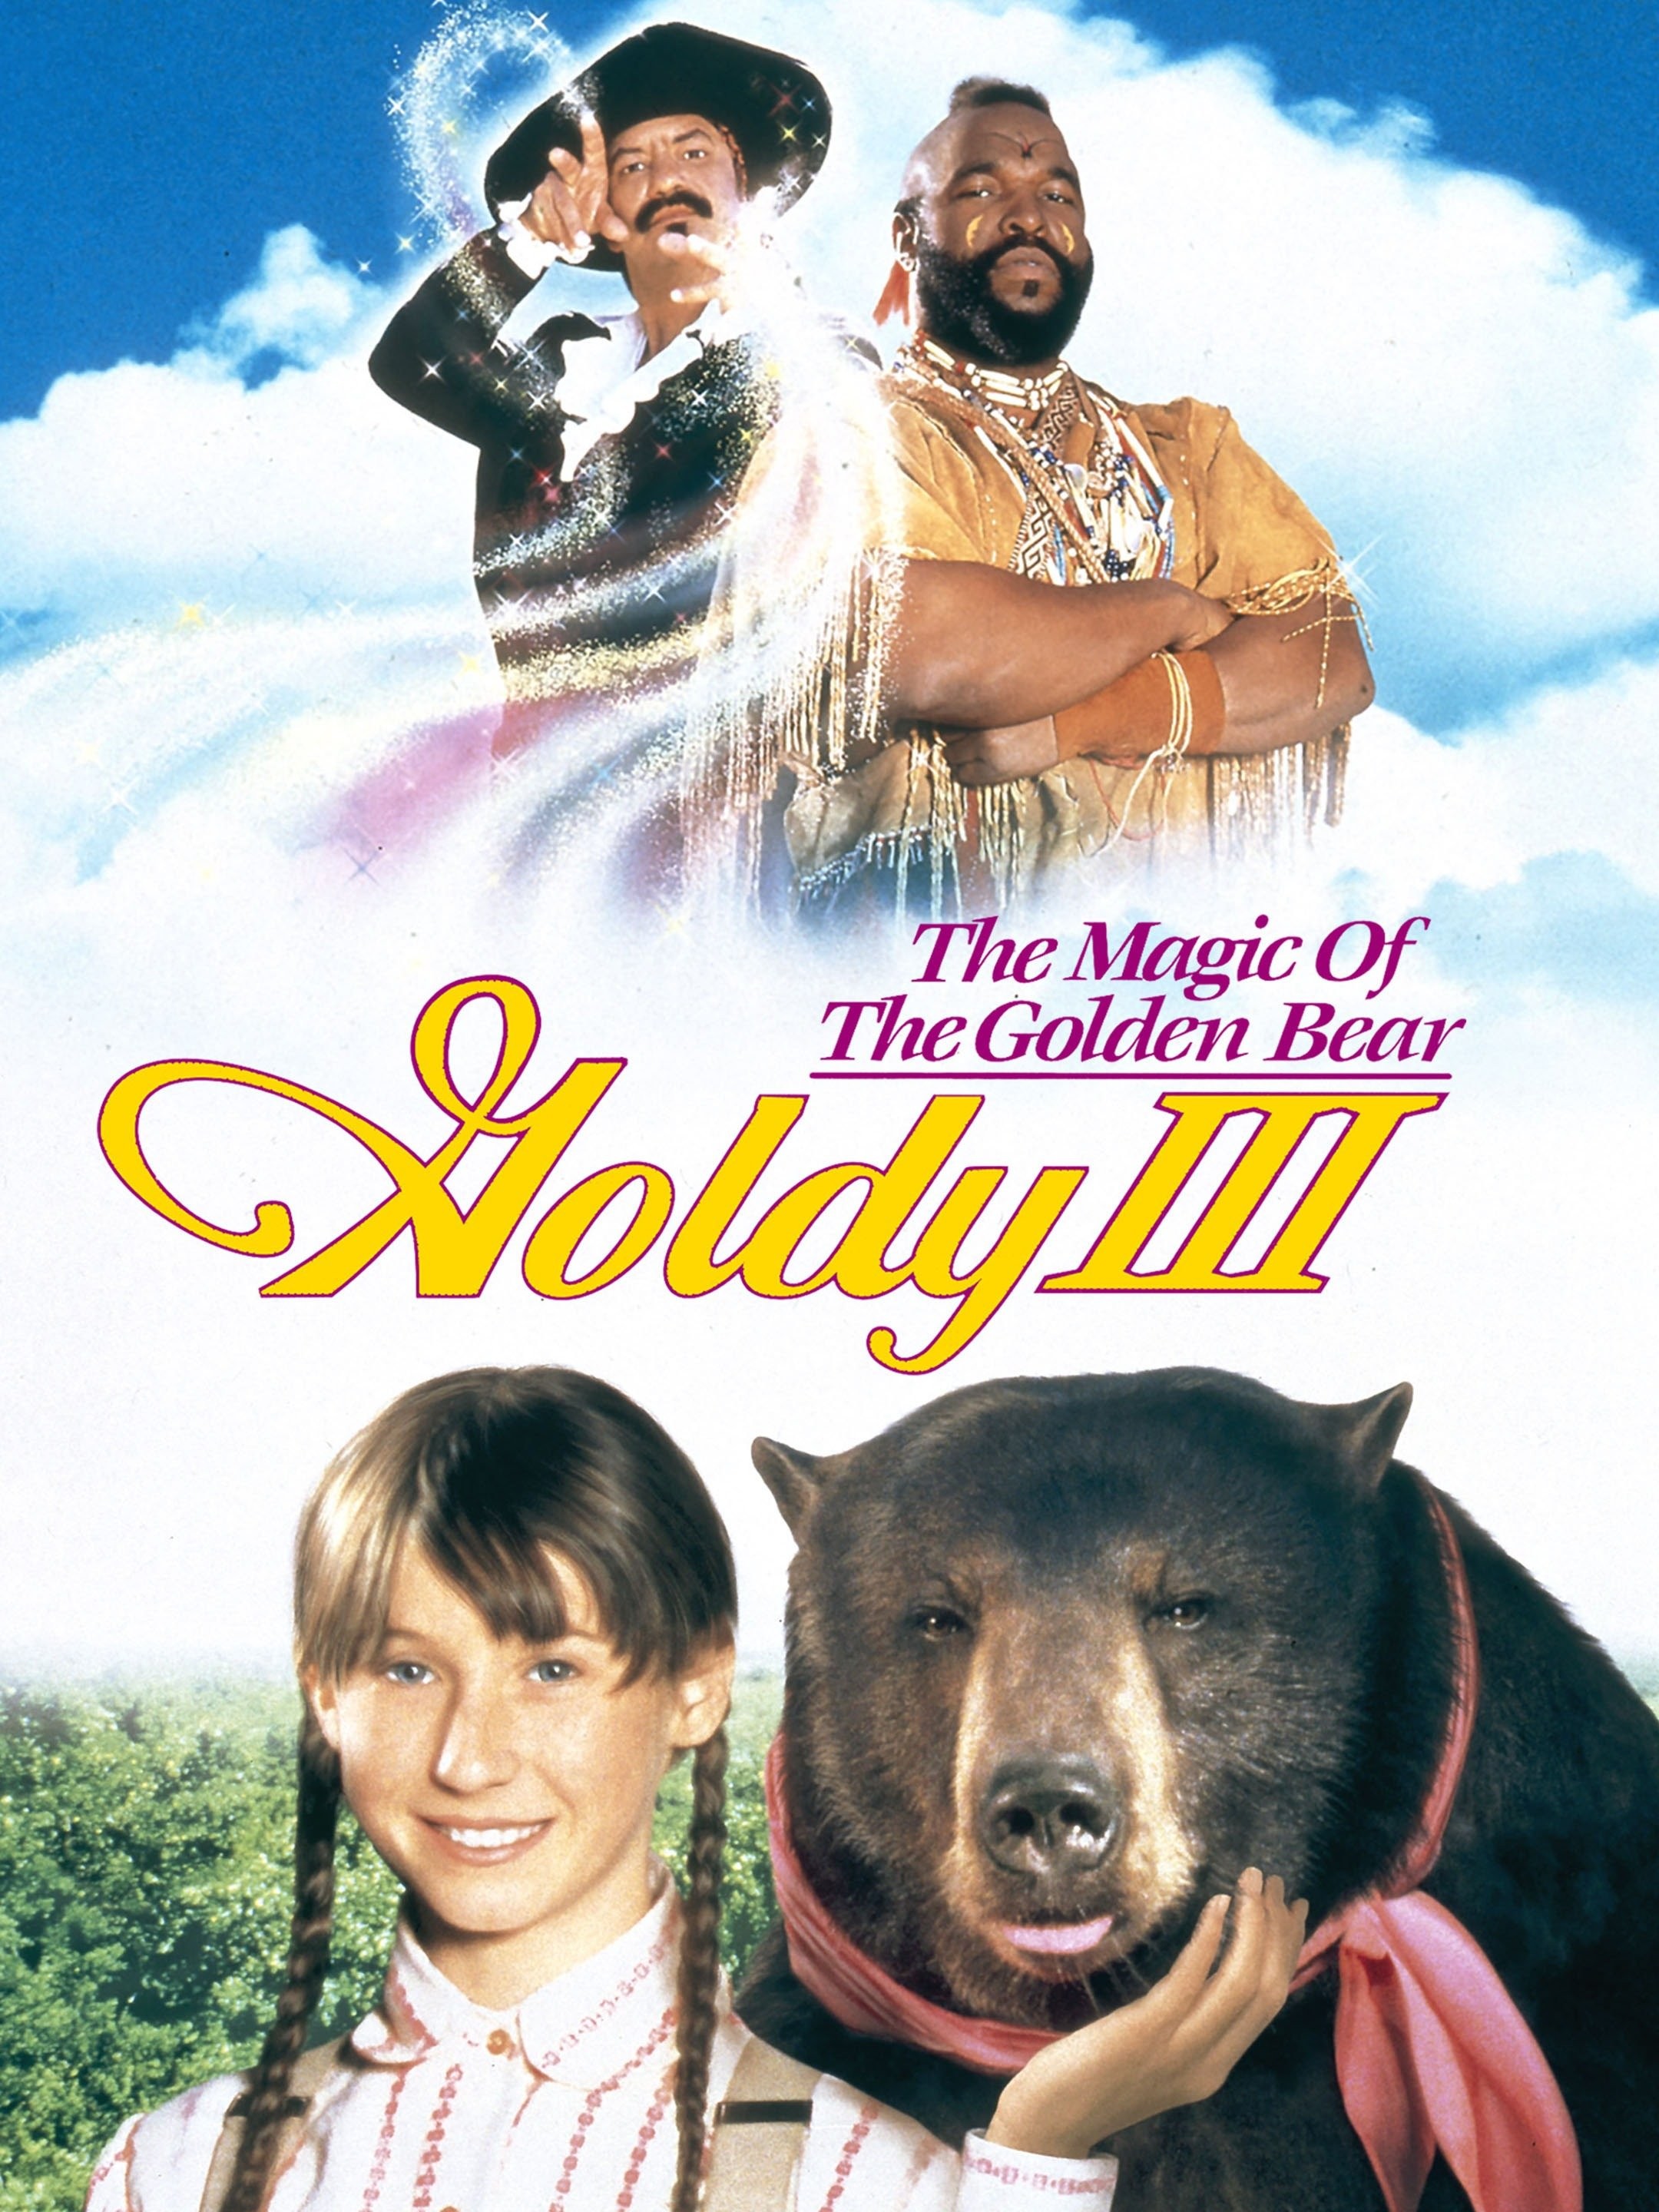 The Magic of the Golden Bear: Goldy III - Rotten Tomatoes